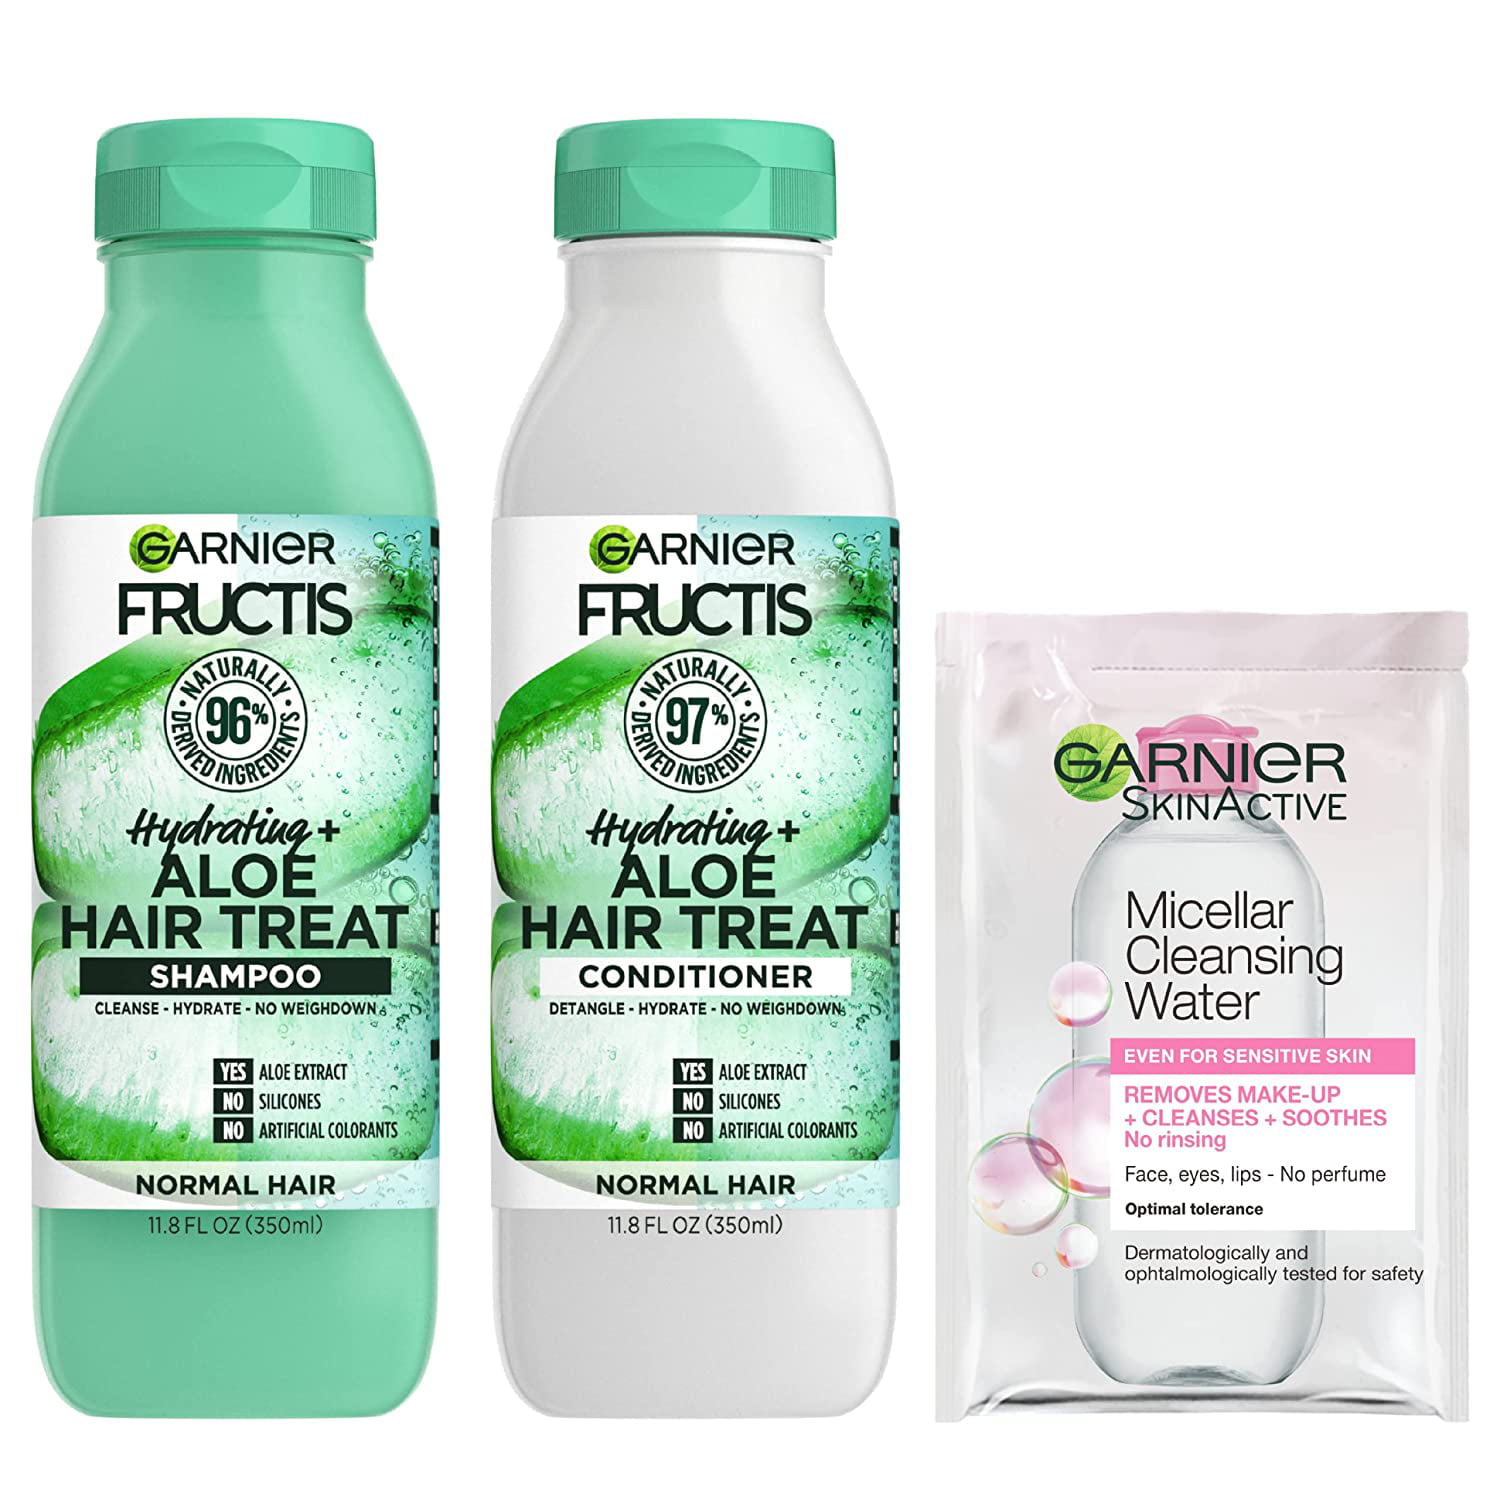 Garnier Haircare Fructis Hydrating Treat Shampoo And Conditioner, 98  Percent Naturally Derived Ingredients, Aloe, Nourish Dry Hair,  Oz Ea,  W/Micellar Sample (Packaging May Vary) 